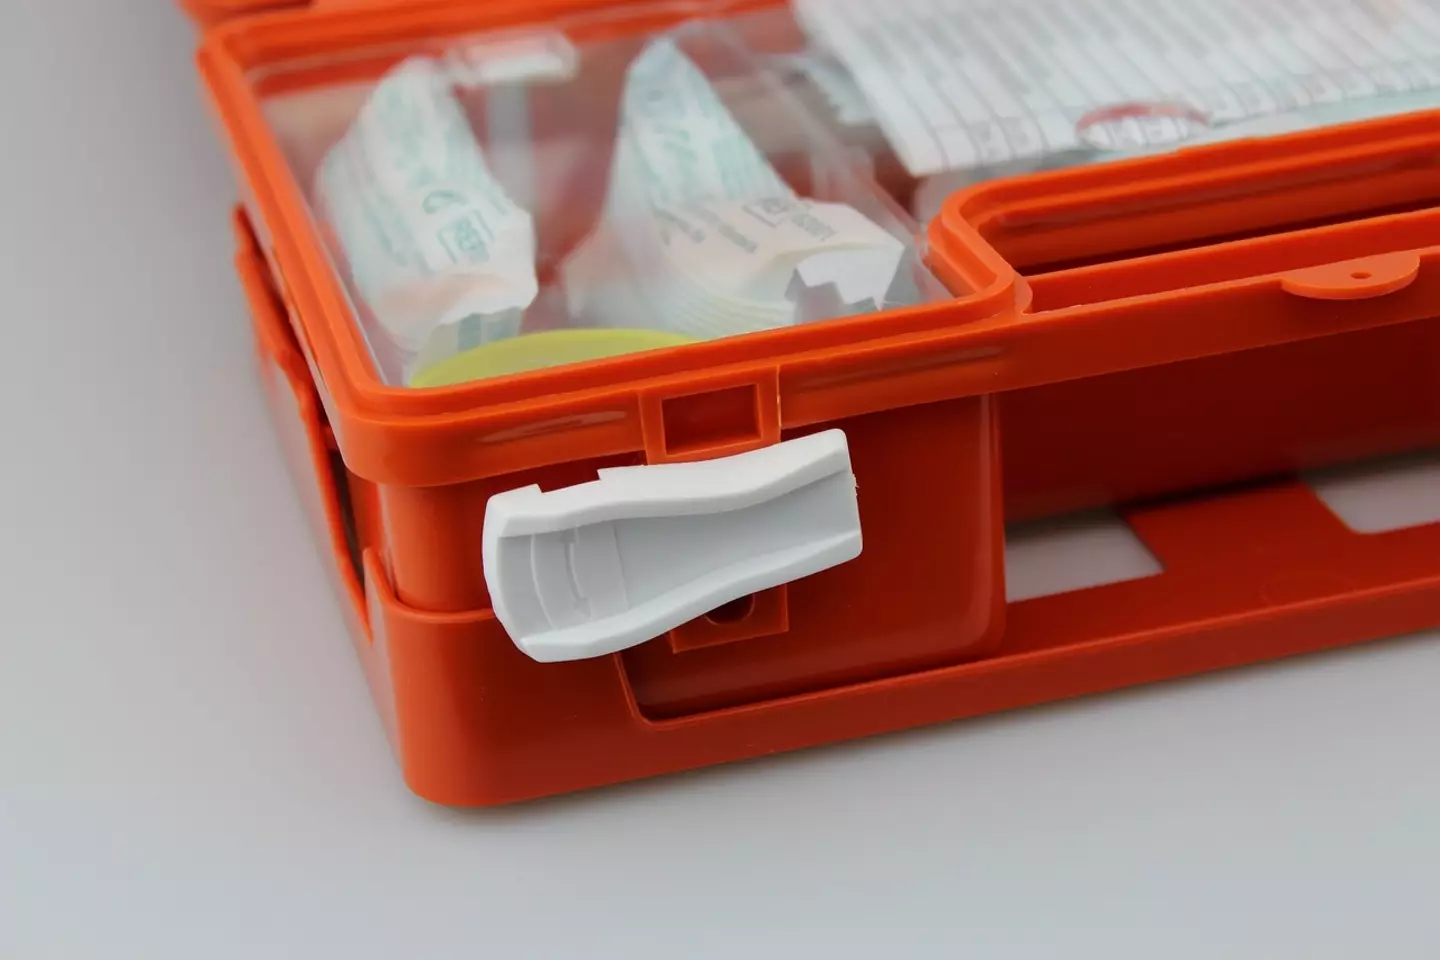 There might be something missing from your first aid kit.